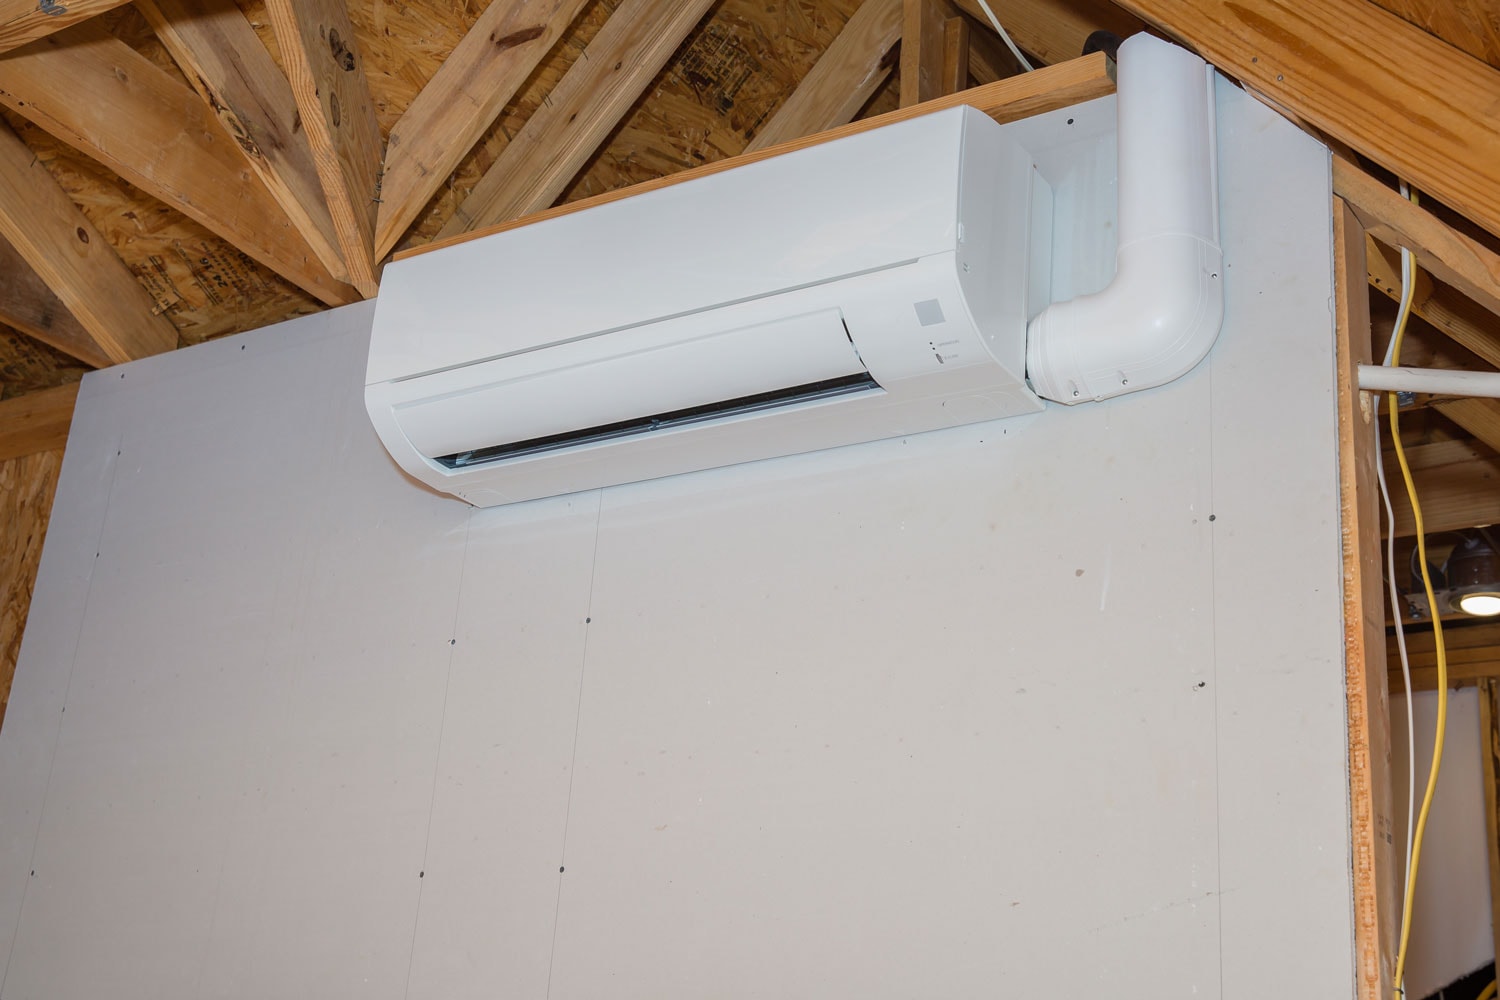 A ductless mini split AC unit mounted on the wall